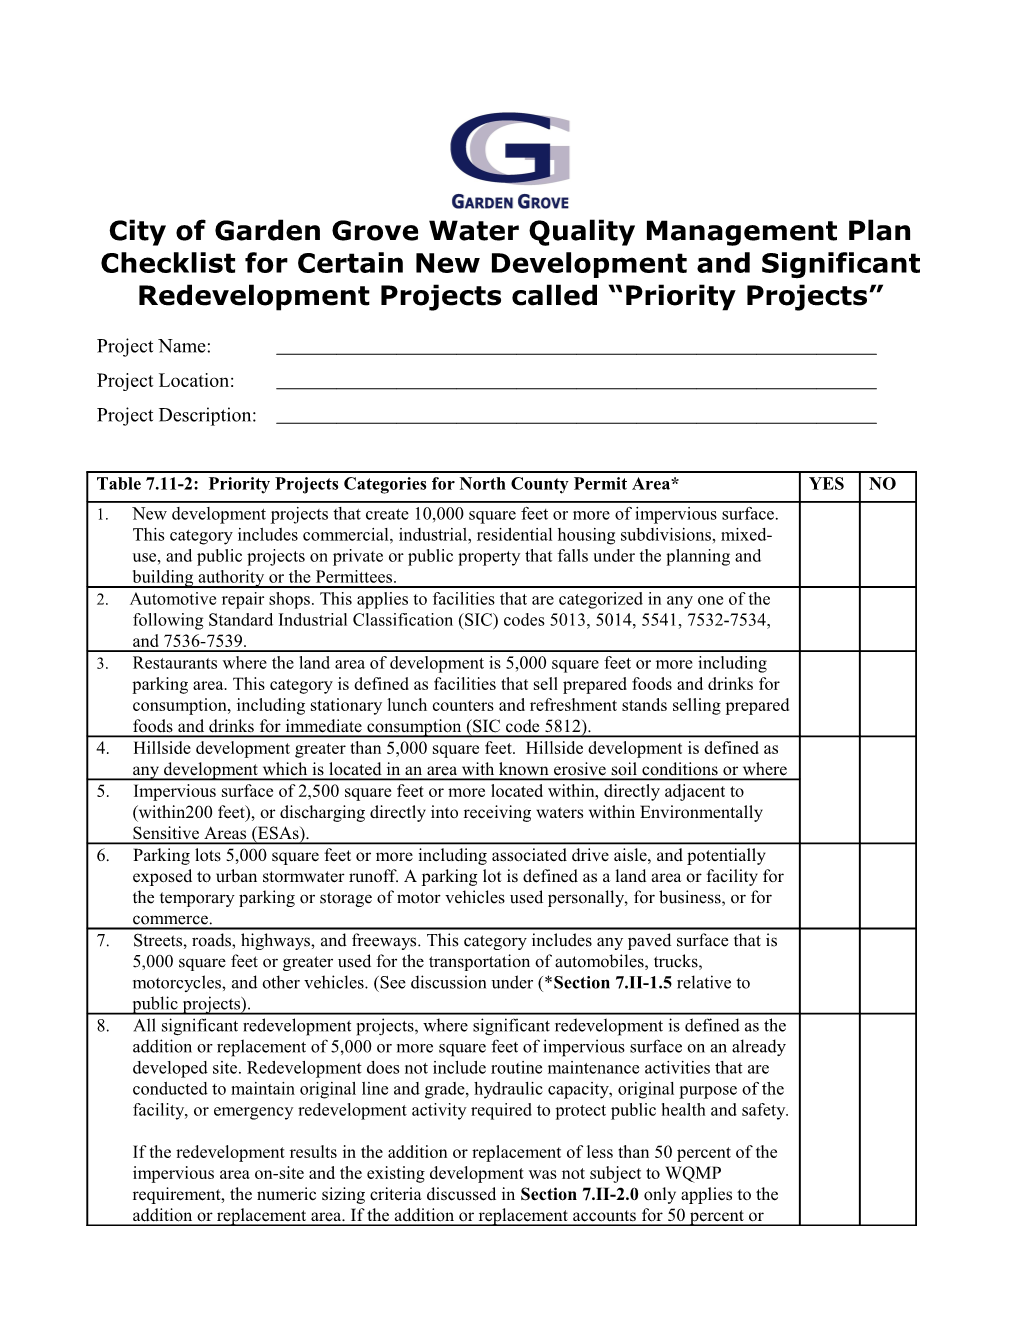 Table 7.11-2: Priority Projects Categories for North County Permit Area*